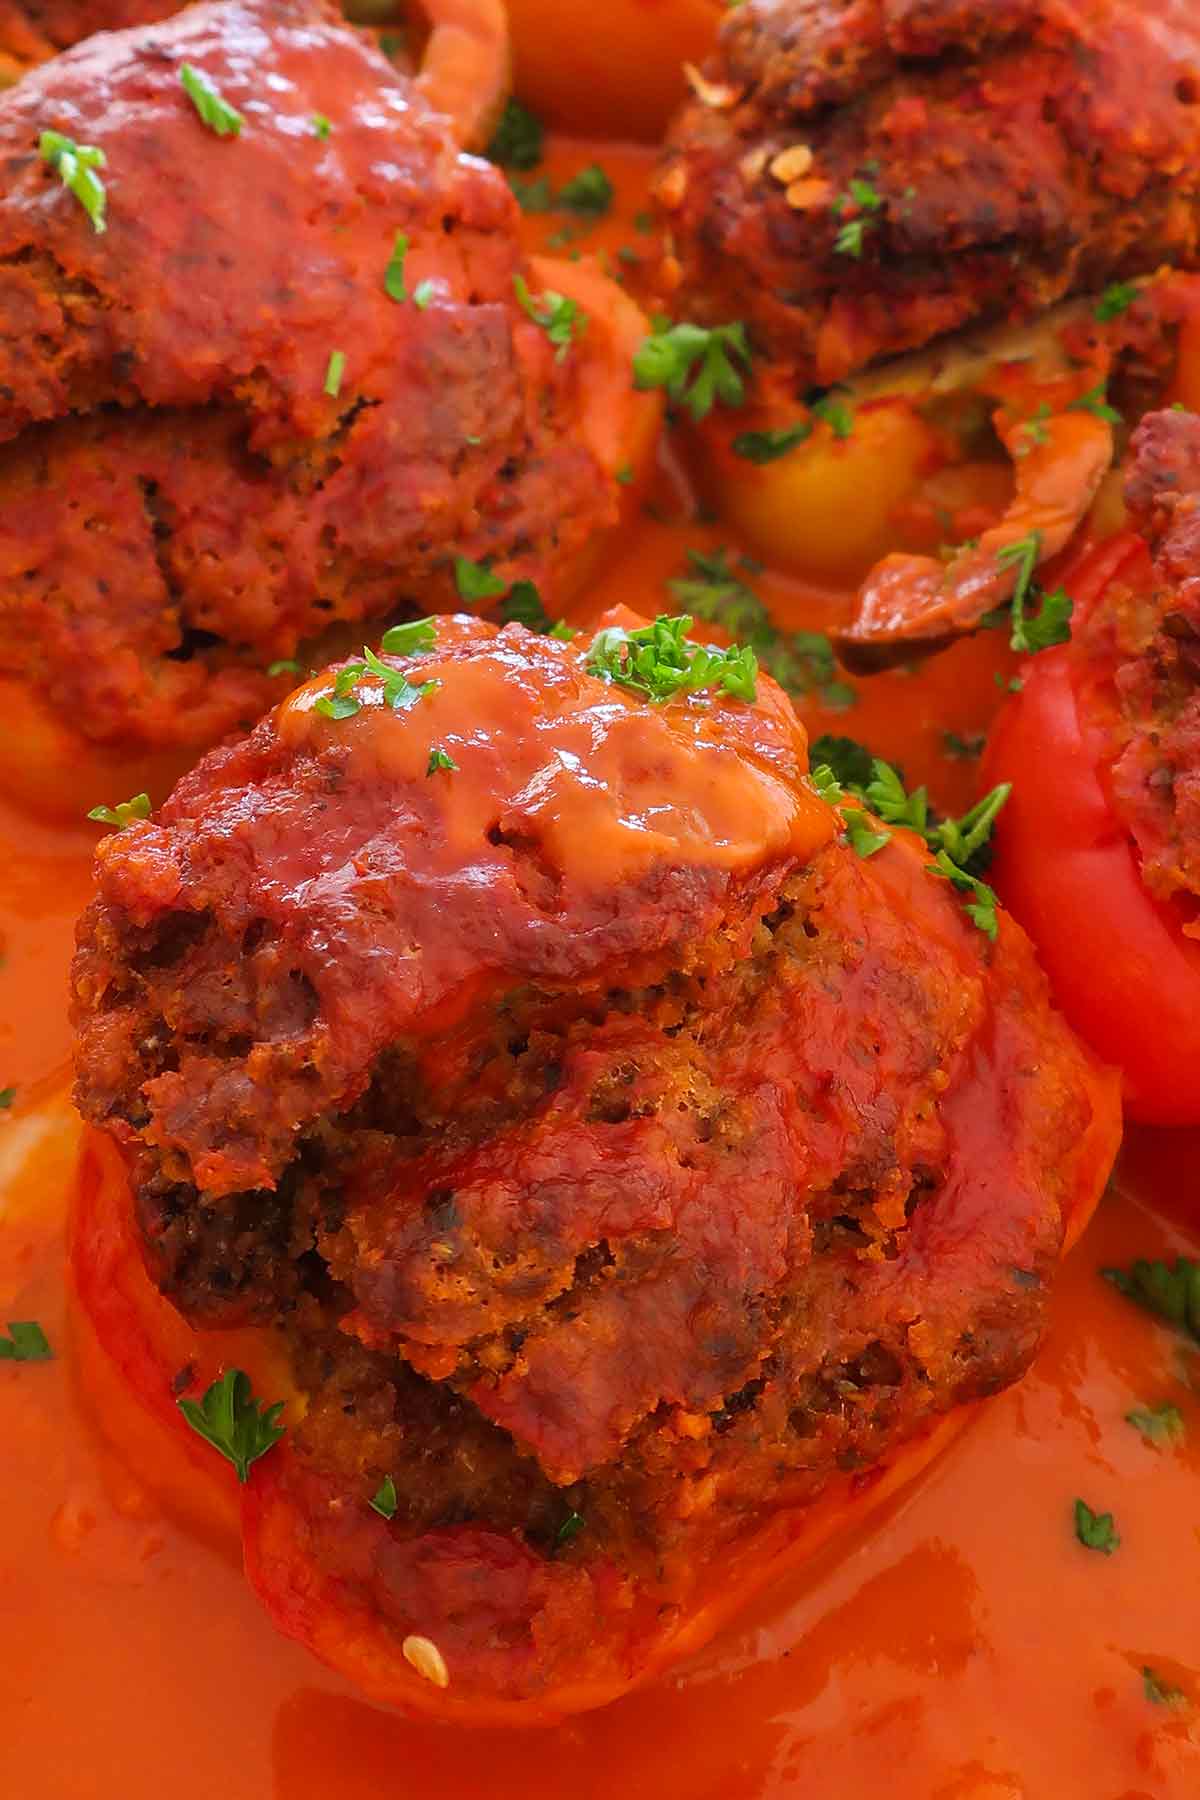 one stuffed pepper with meat, sauce and garnish. of parsley